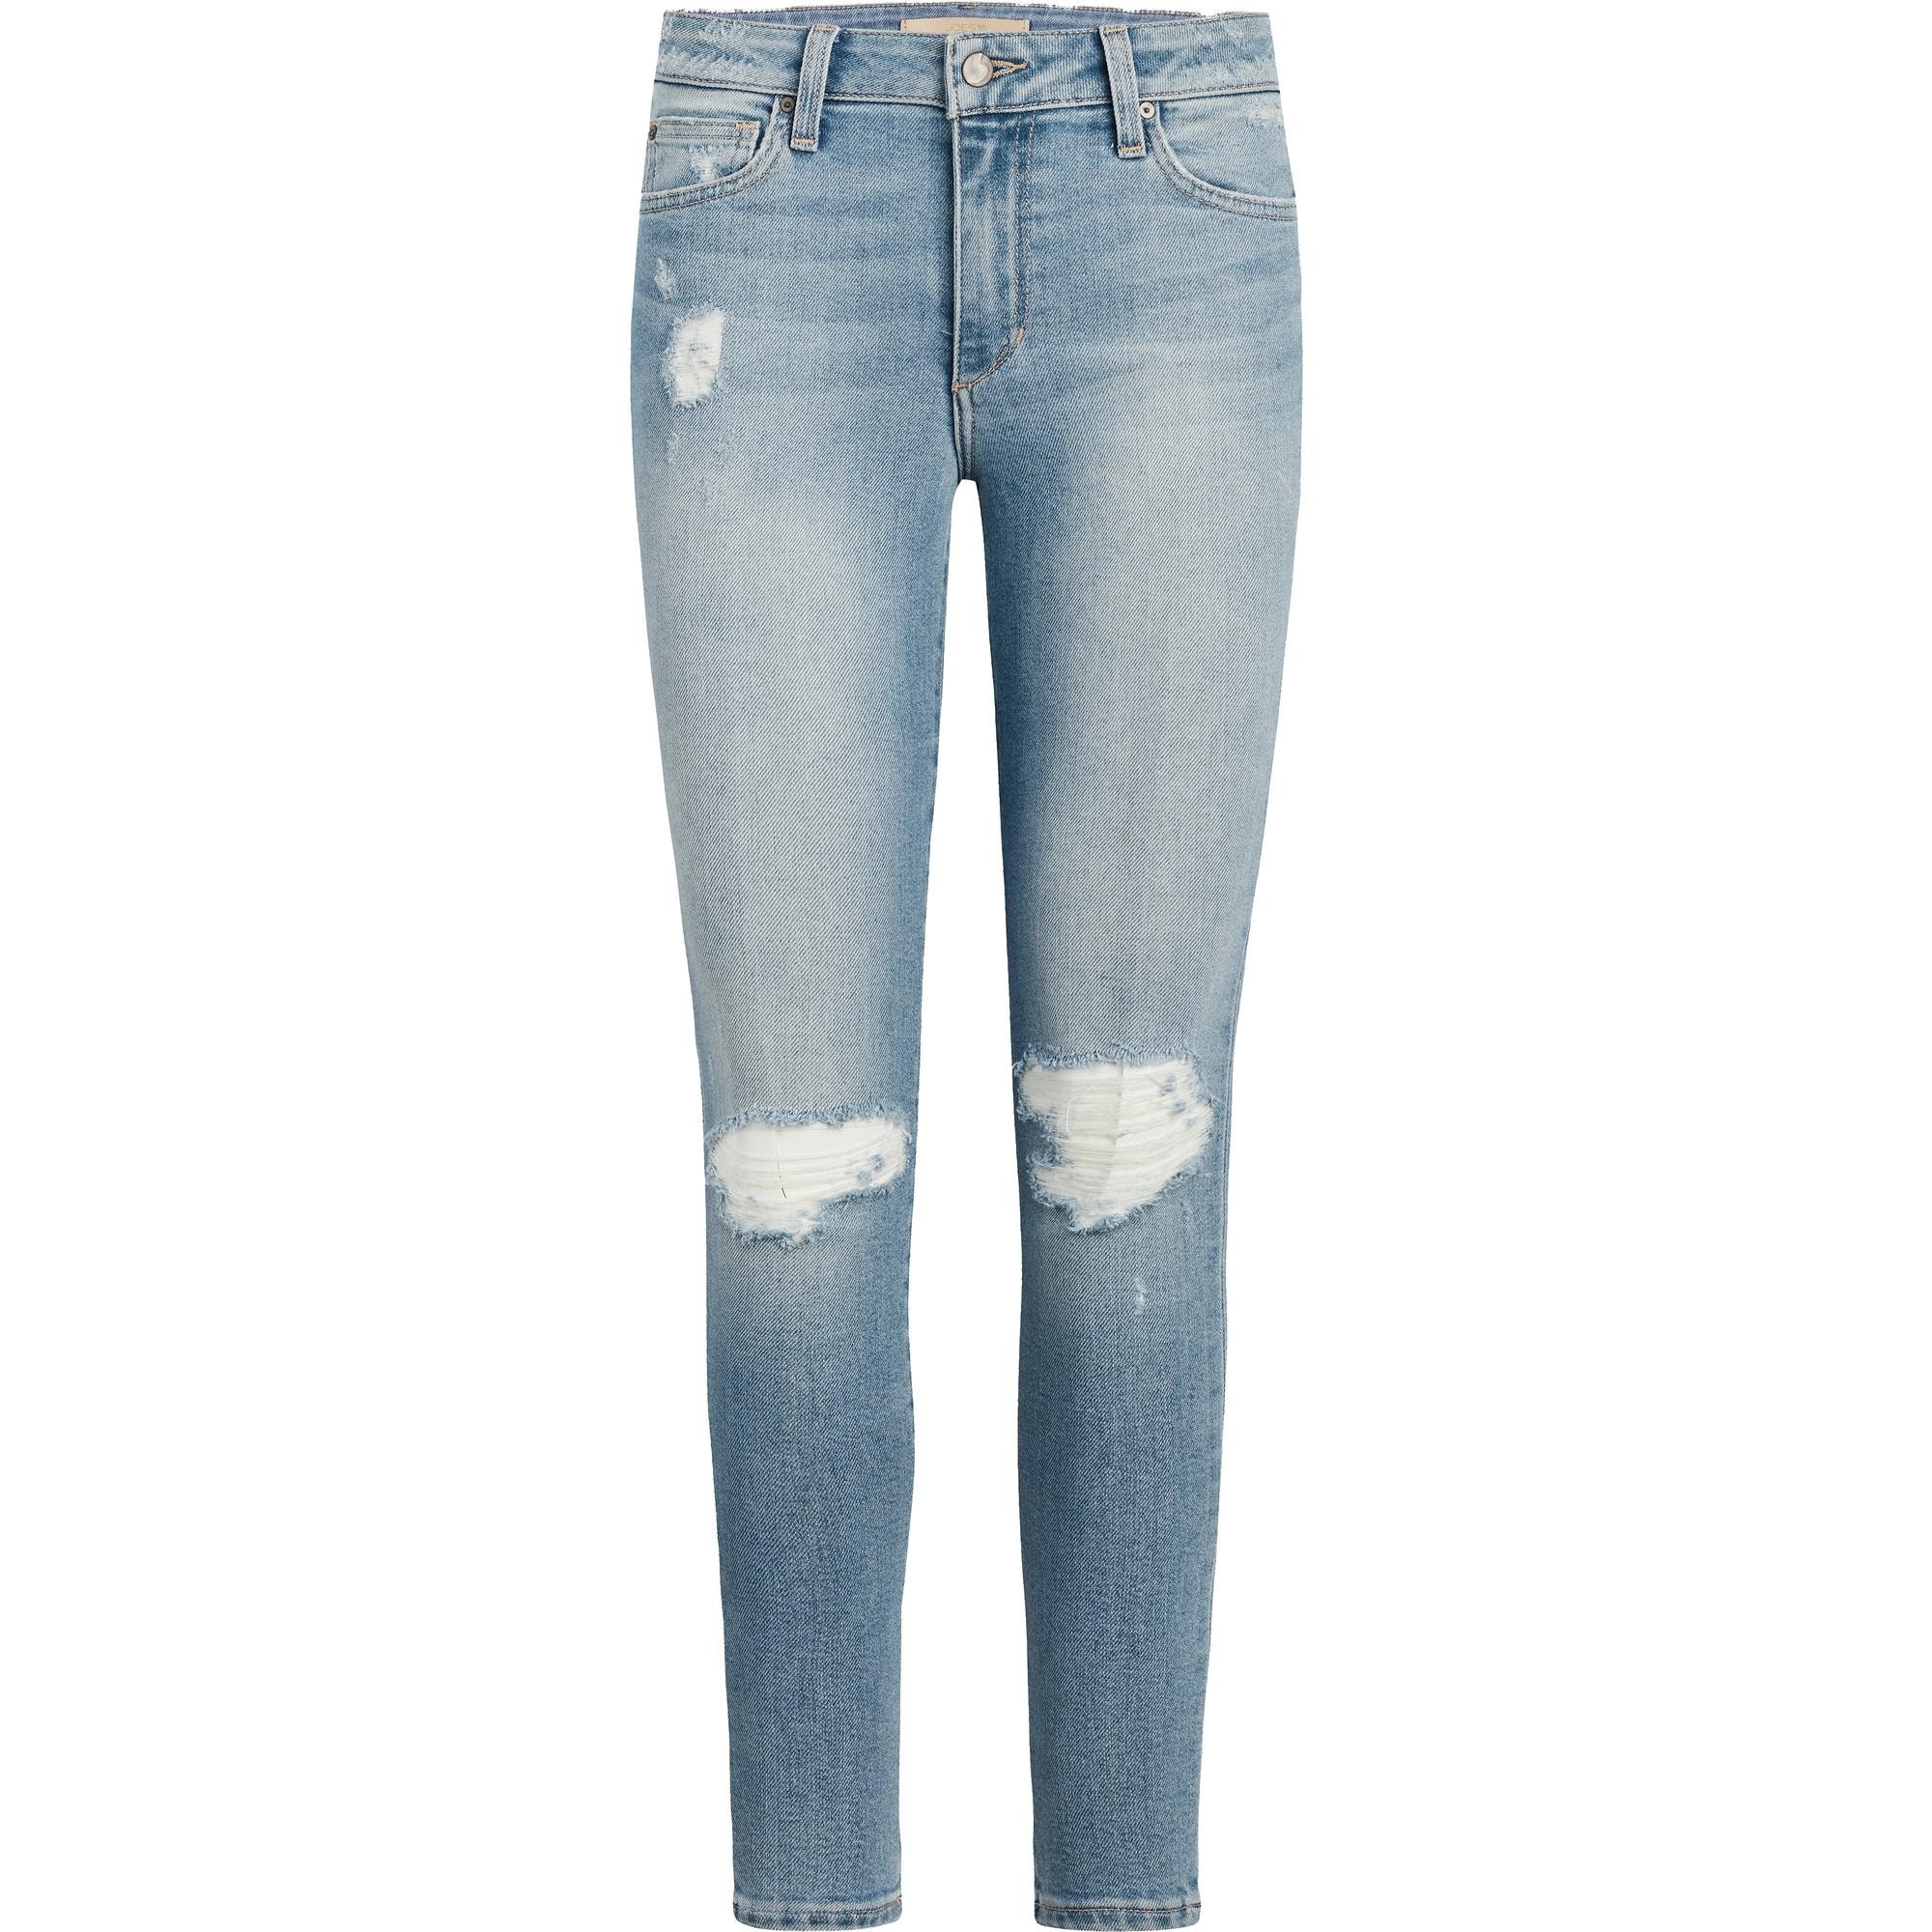 women's distressed ankle jeans